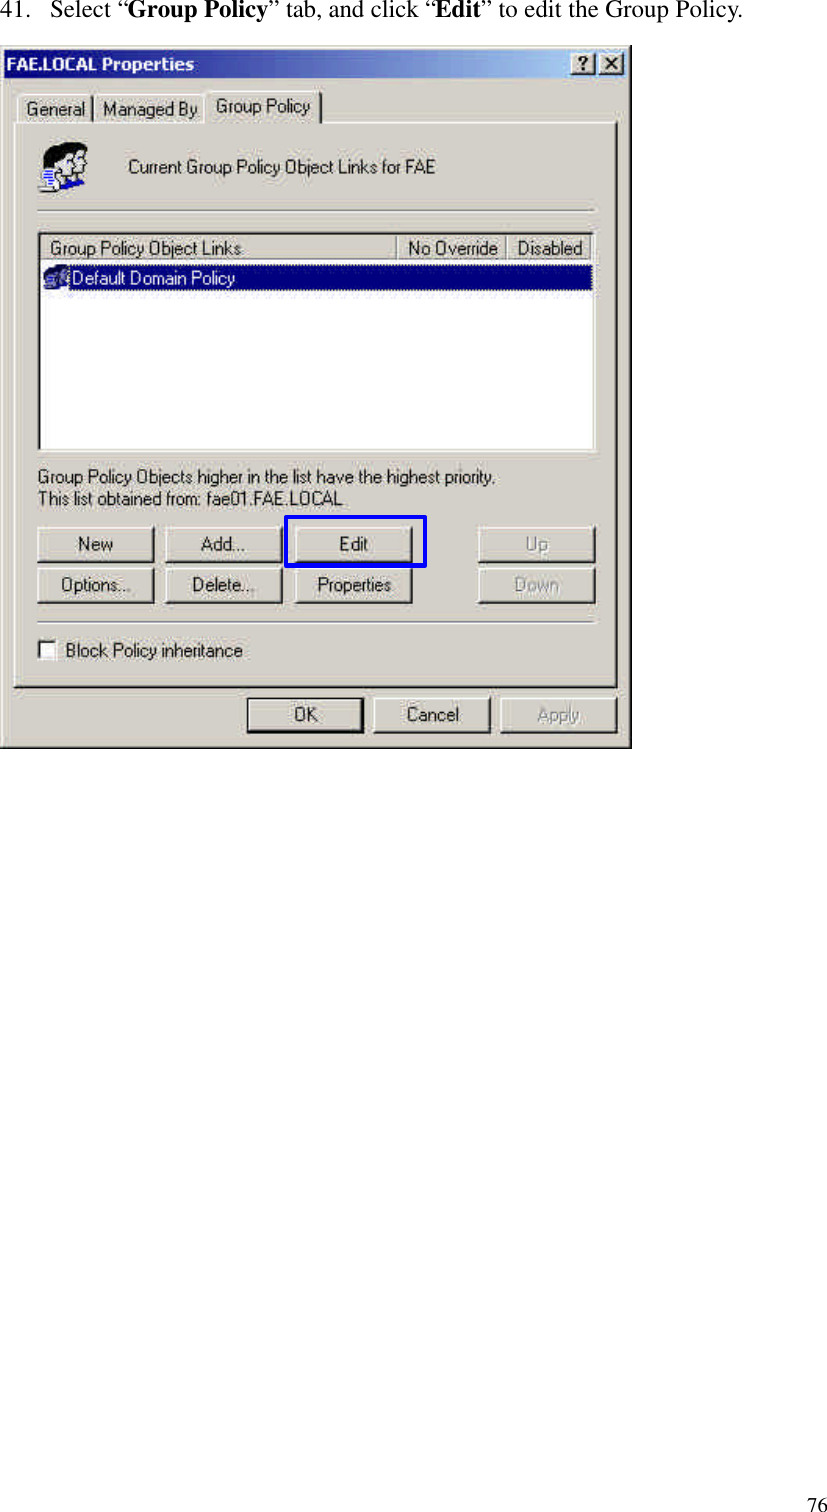  7641. Select “Group Policy” tab, and click “Edit” to edit the Group Policy.                     